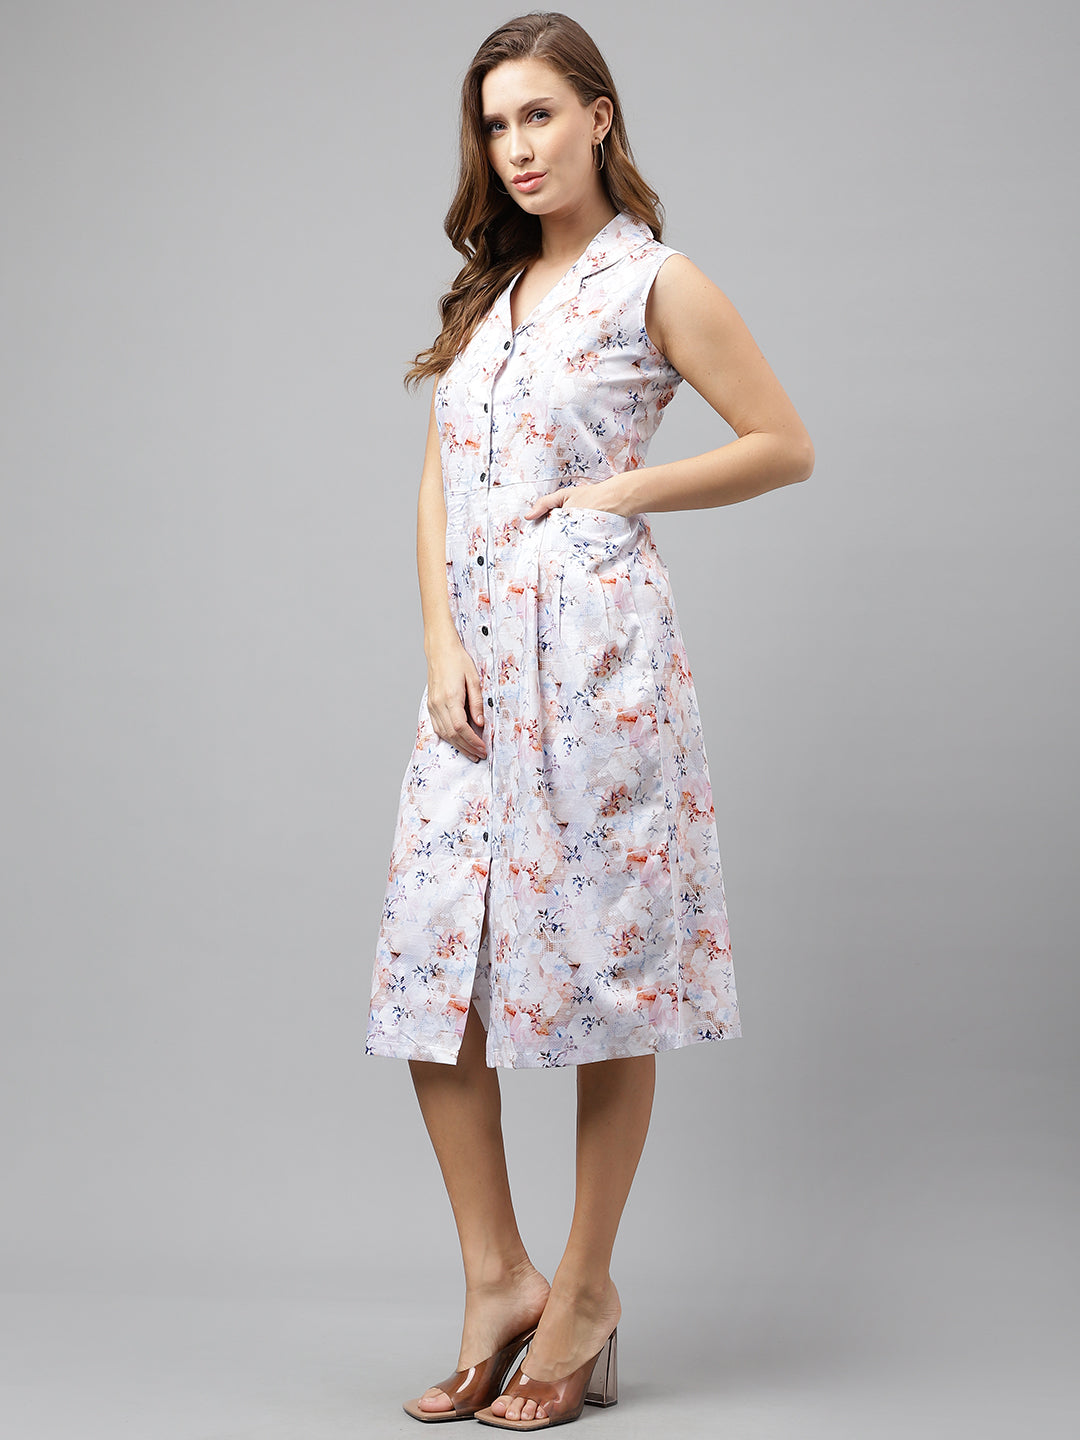 Women White & Pink Pure Cotton Floral Printed Mid Length Sleeveless Regular Fit Formal A-line Dress